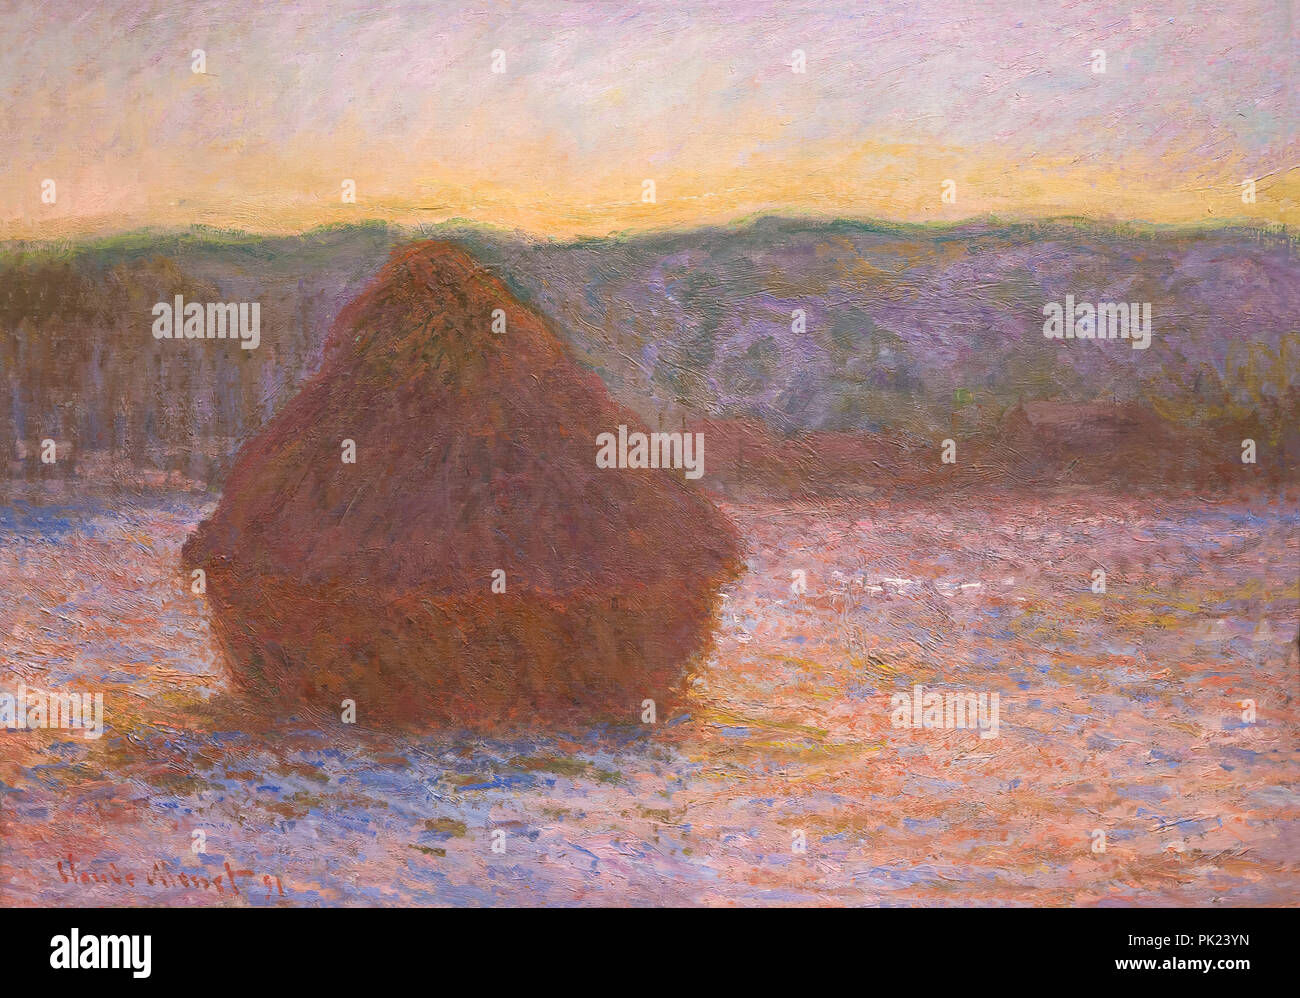 Stack of Wheat, Thaw, Sunset, Claude Monet, 1890-1891, Art Institute of Chicago, Chicago, Illinois, USA, North America, Stock Photo